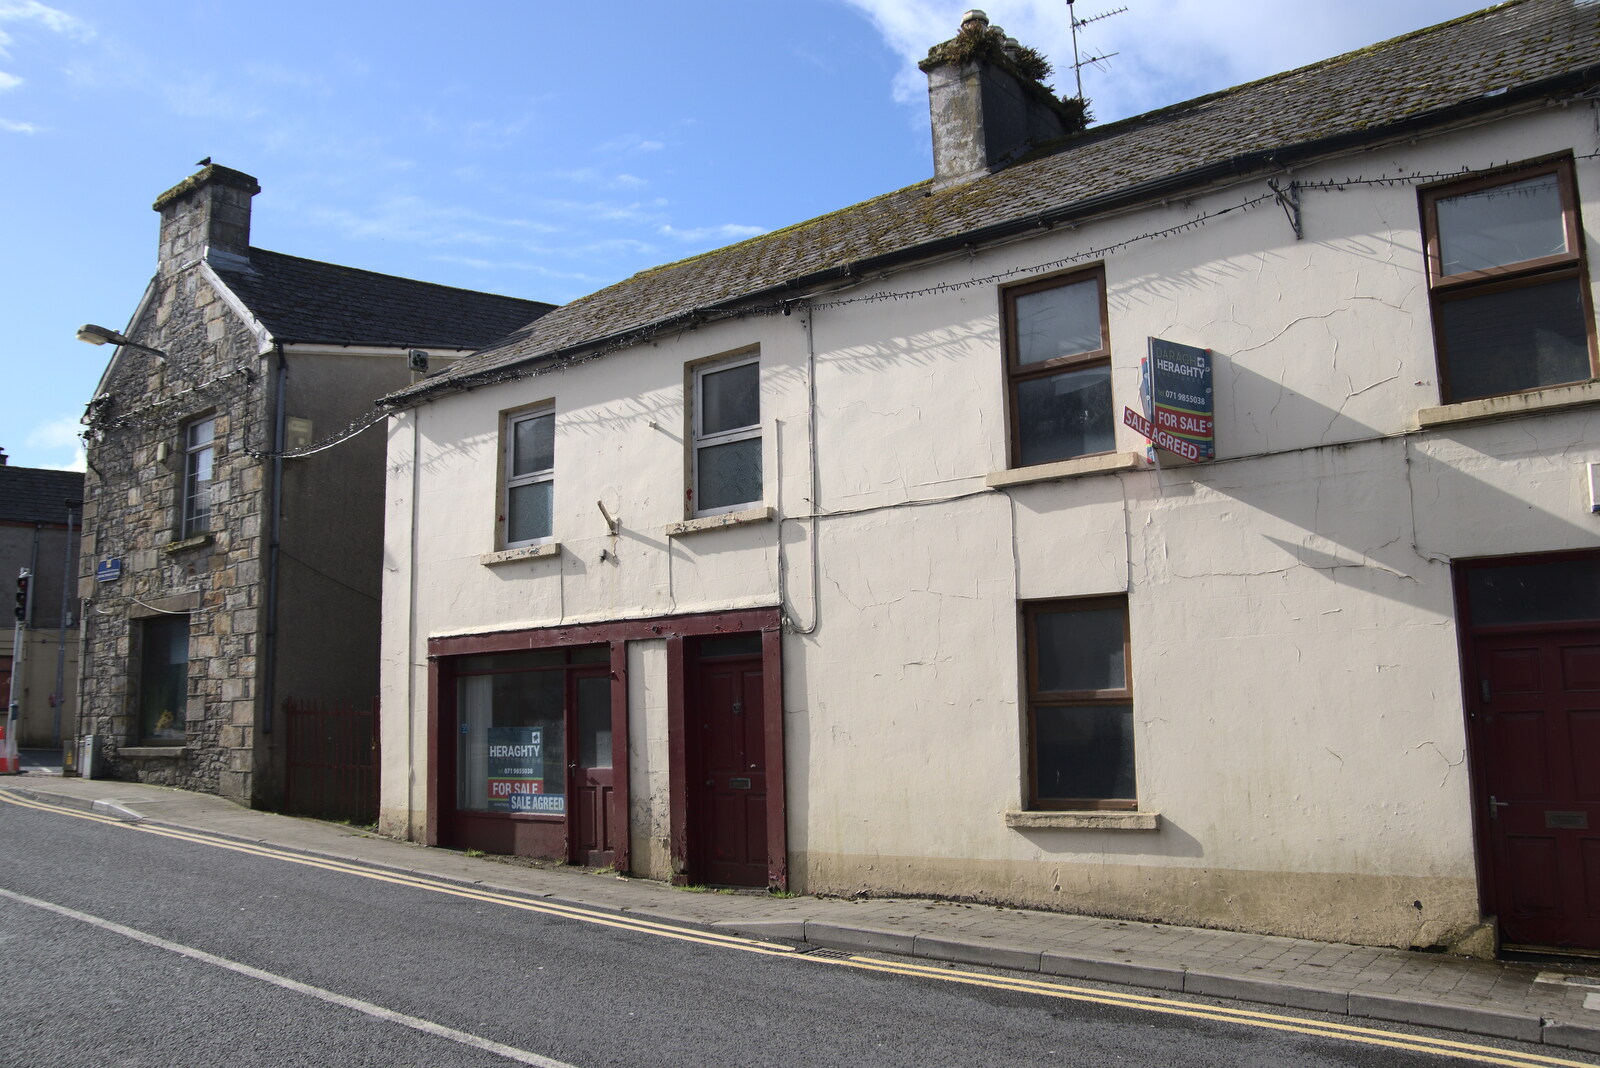 Derelict shops in Manorhamilton from Manorhamilton and Bundoran, Leitrim and Donegal, Ireland - 16th April 2022